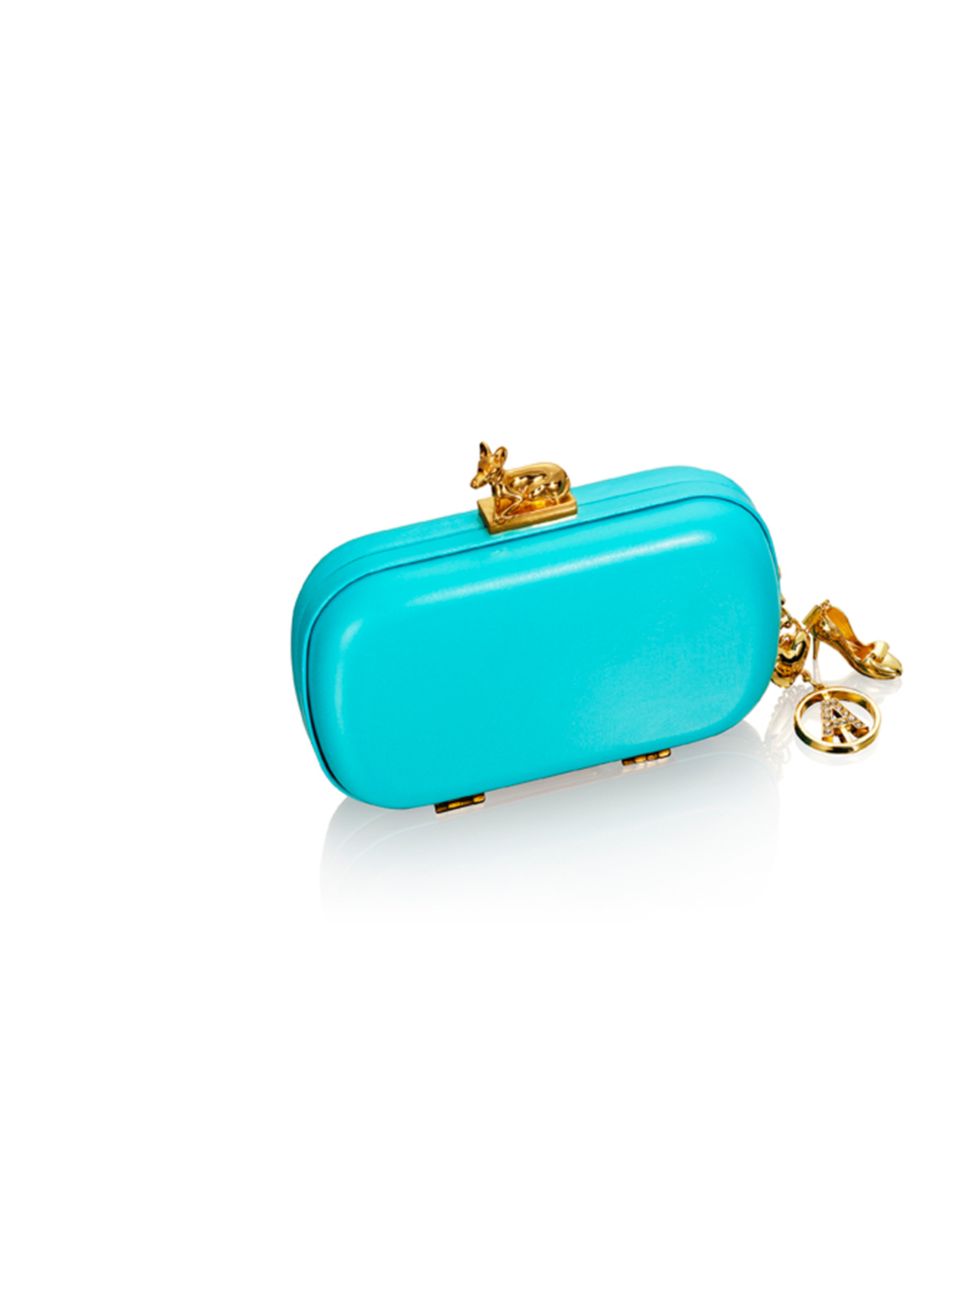 <p><a href="http://www.hm.com/gb/anna-dello-russo">ADR for H&amp;M</a> turquoise and gold clutch, £34.99, for stockists call 0844 736 9000</p>